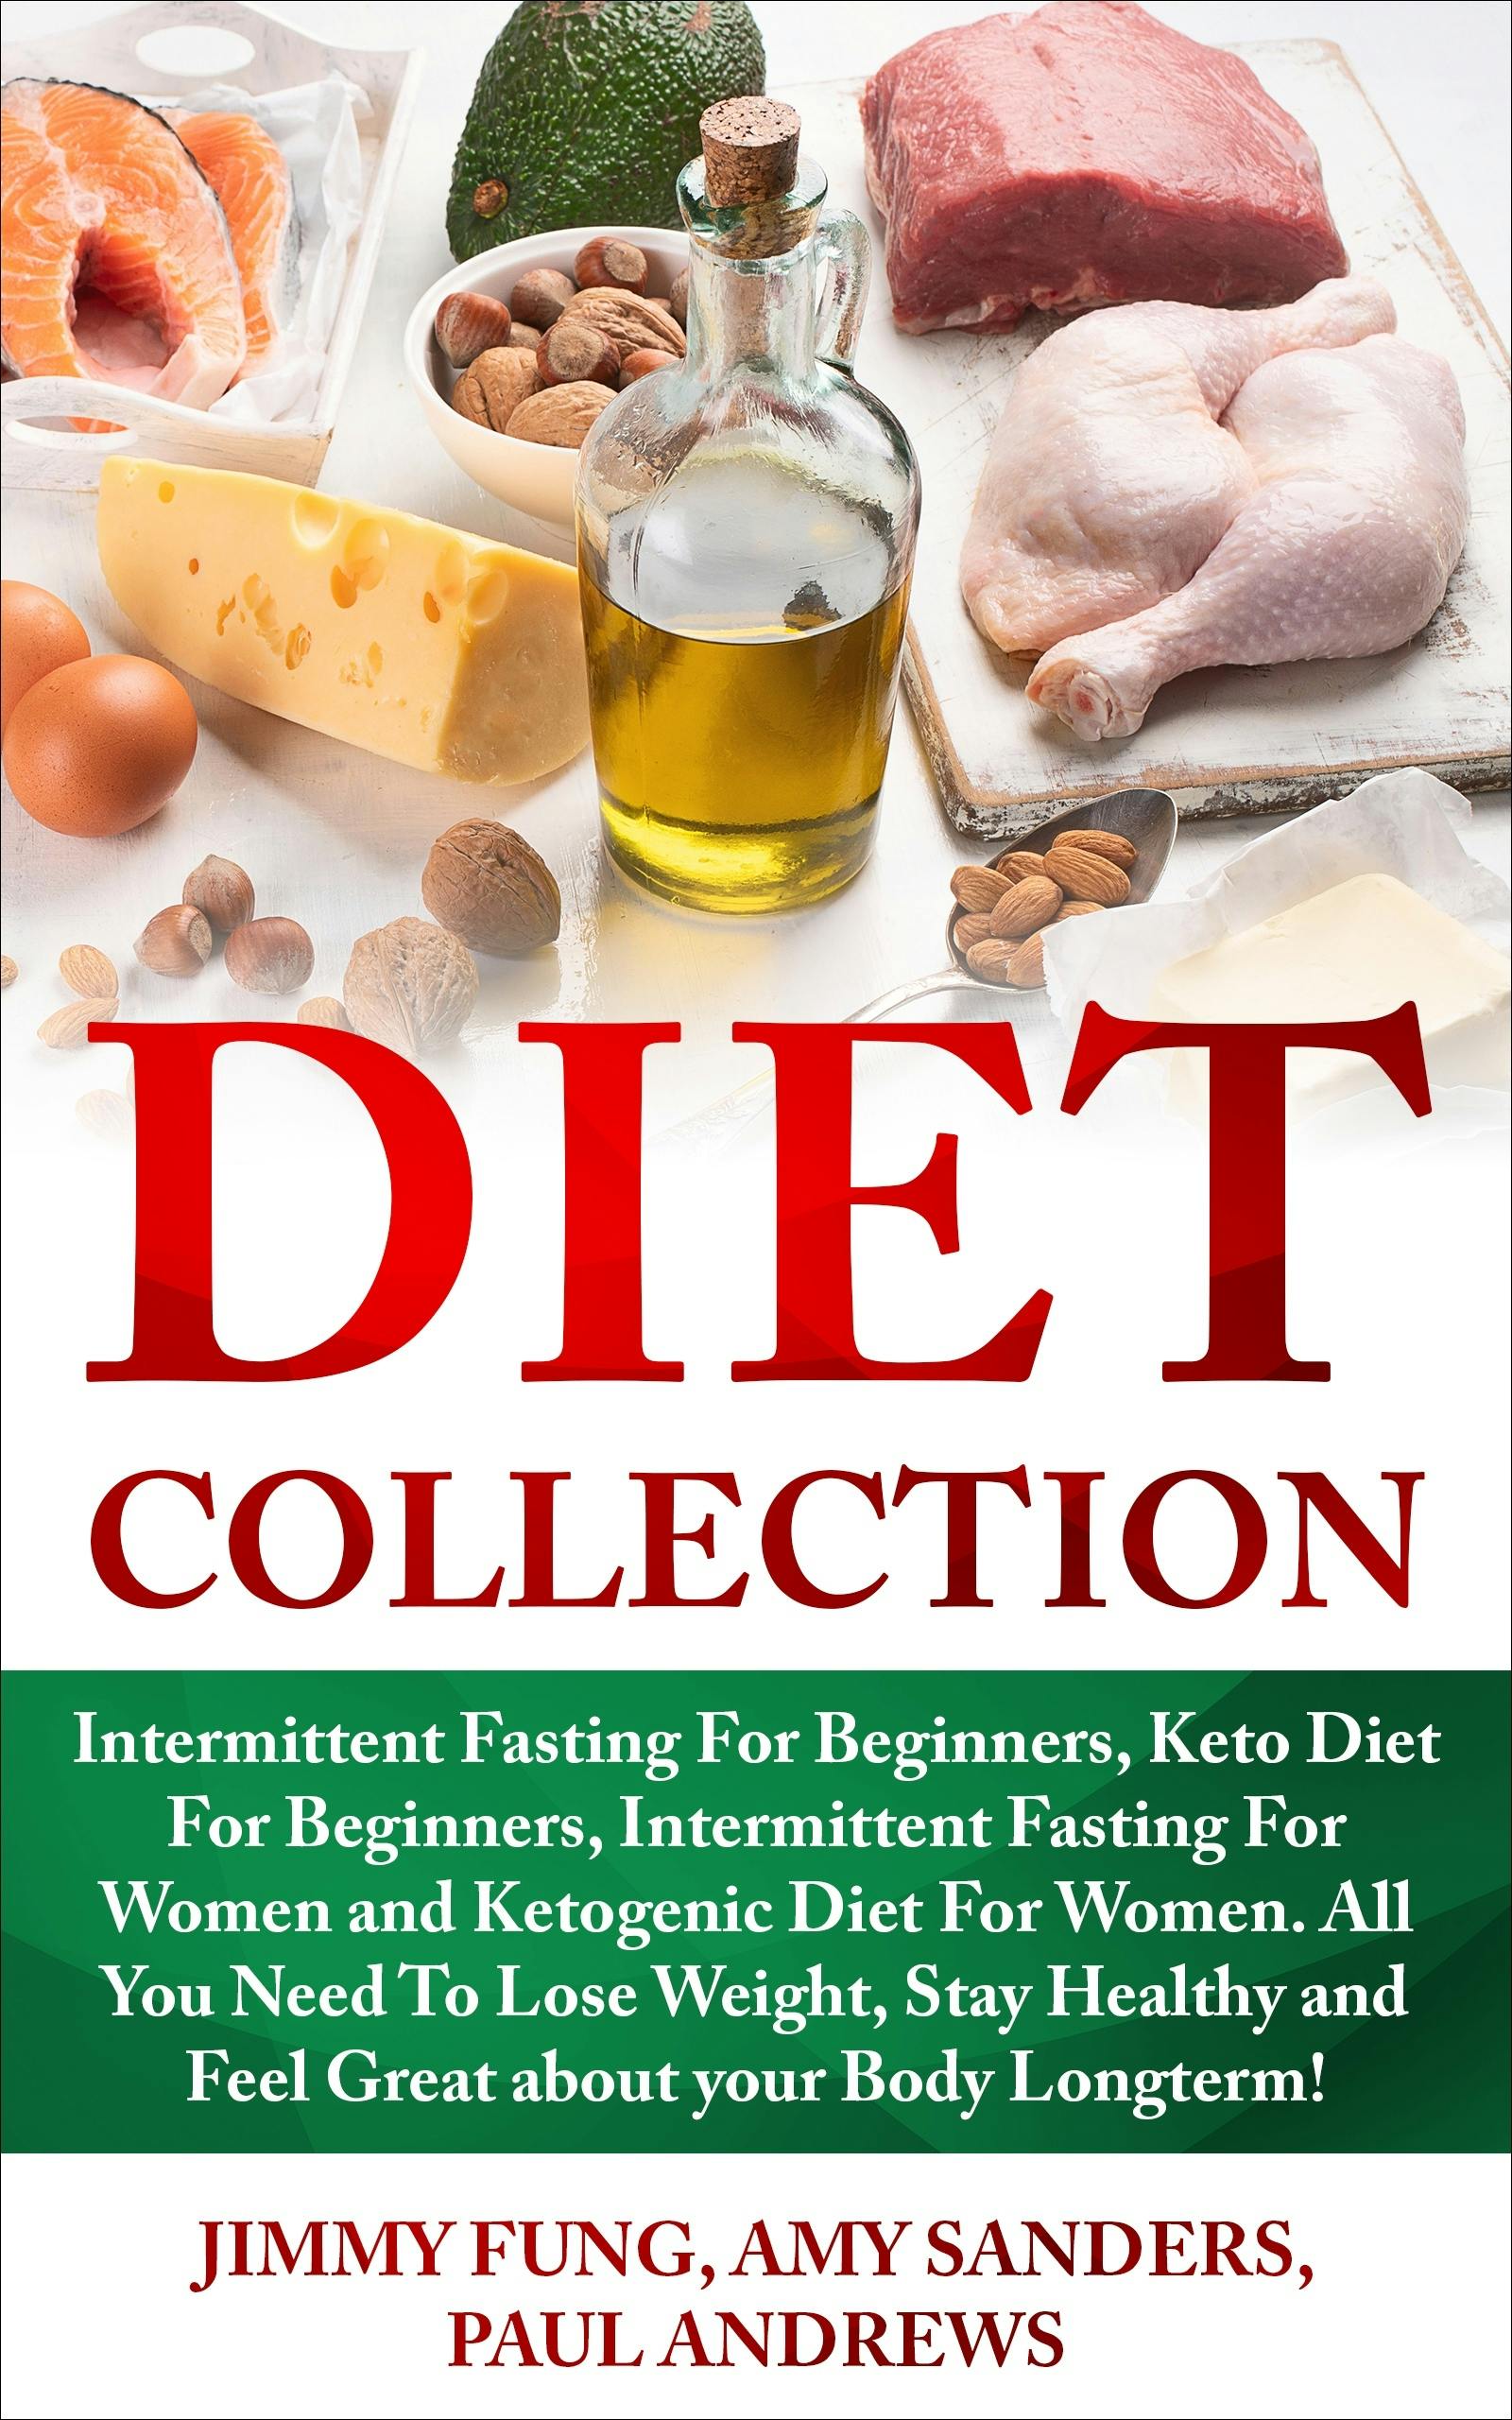 Diet Collection - Amy Sanders, Jimmy Fung, Paul Andrews